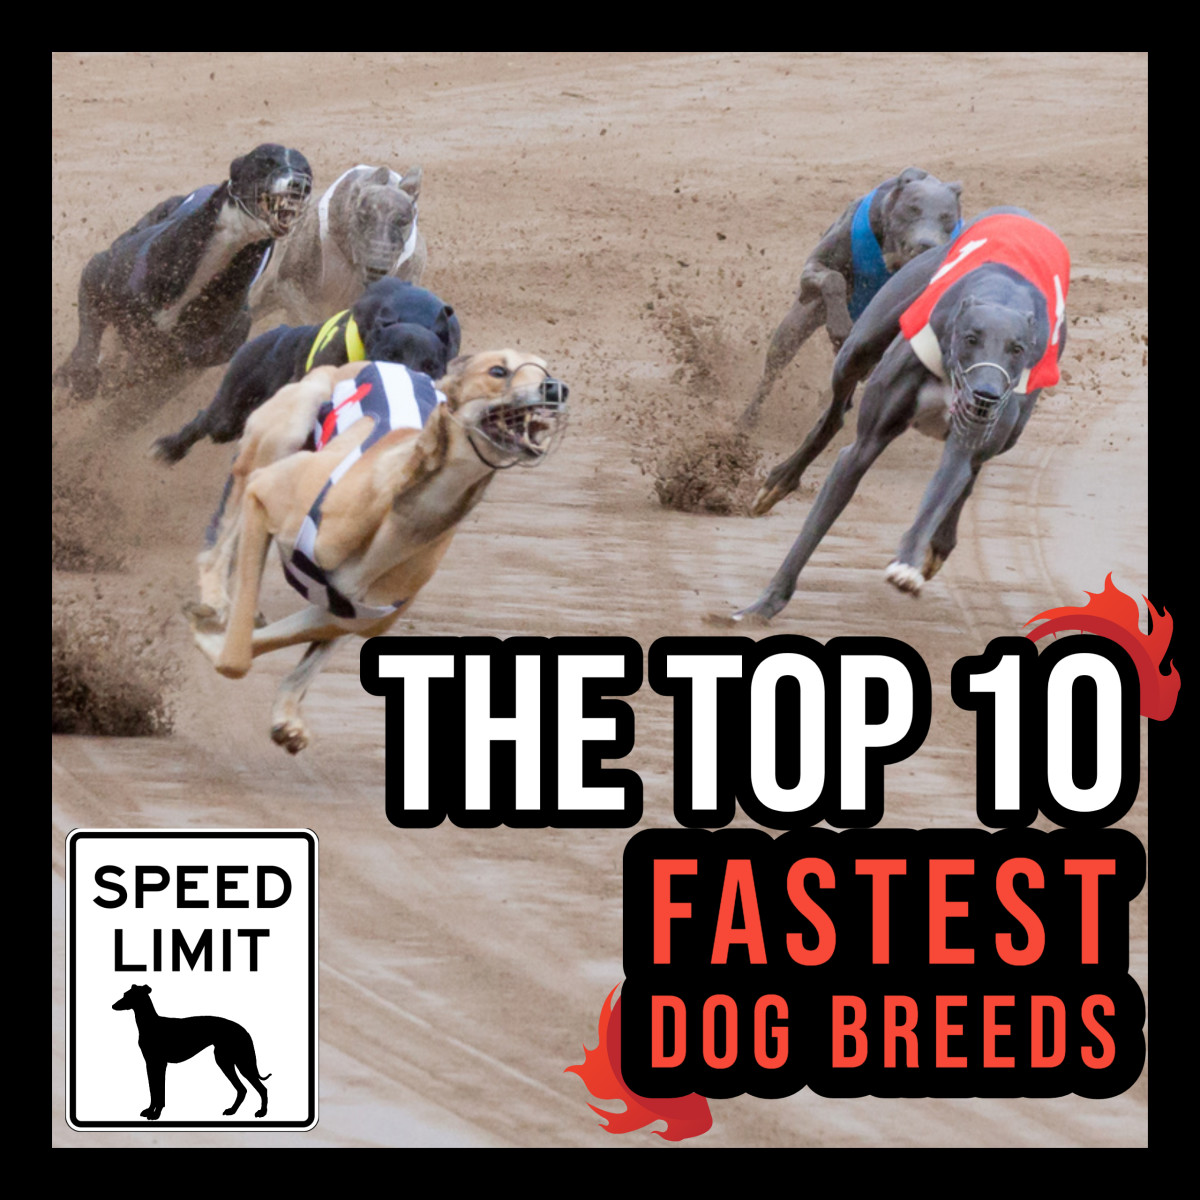 The Top 10 Fastest Dog Breeds